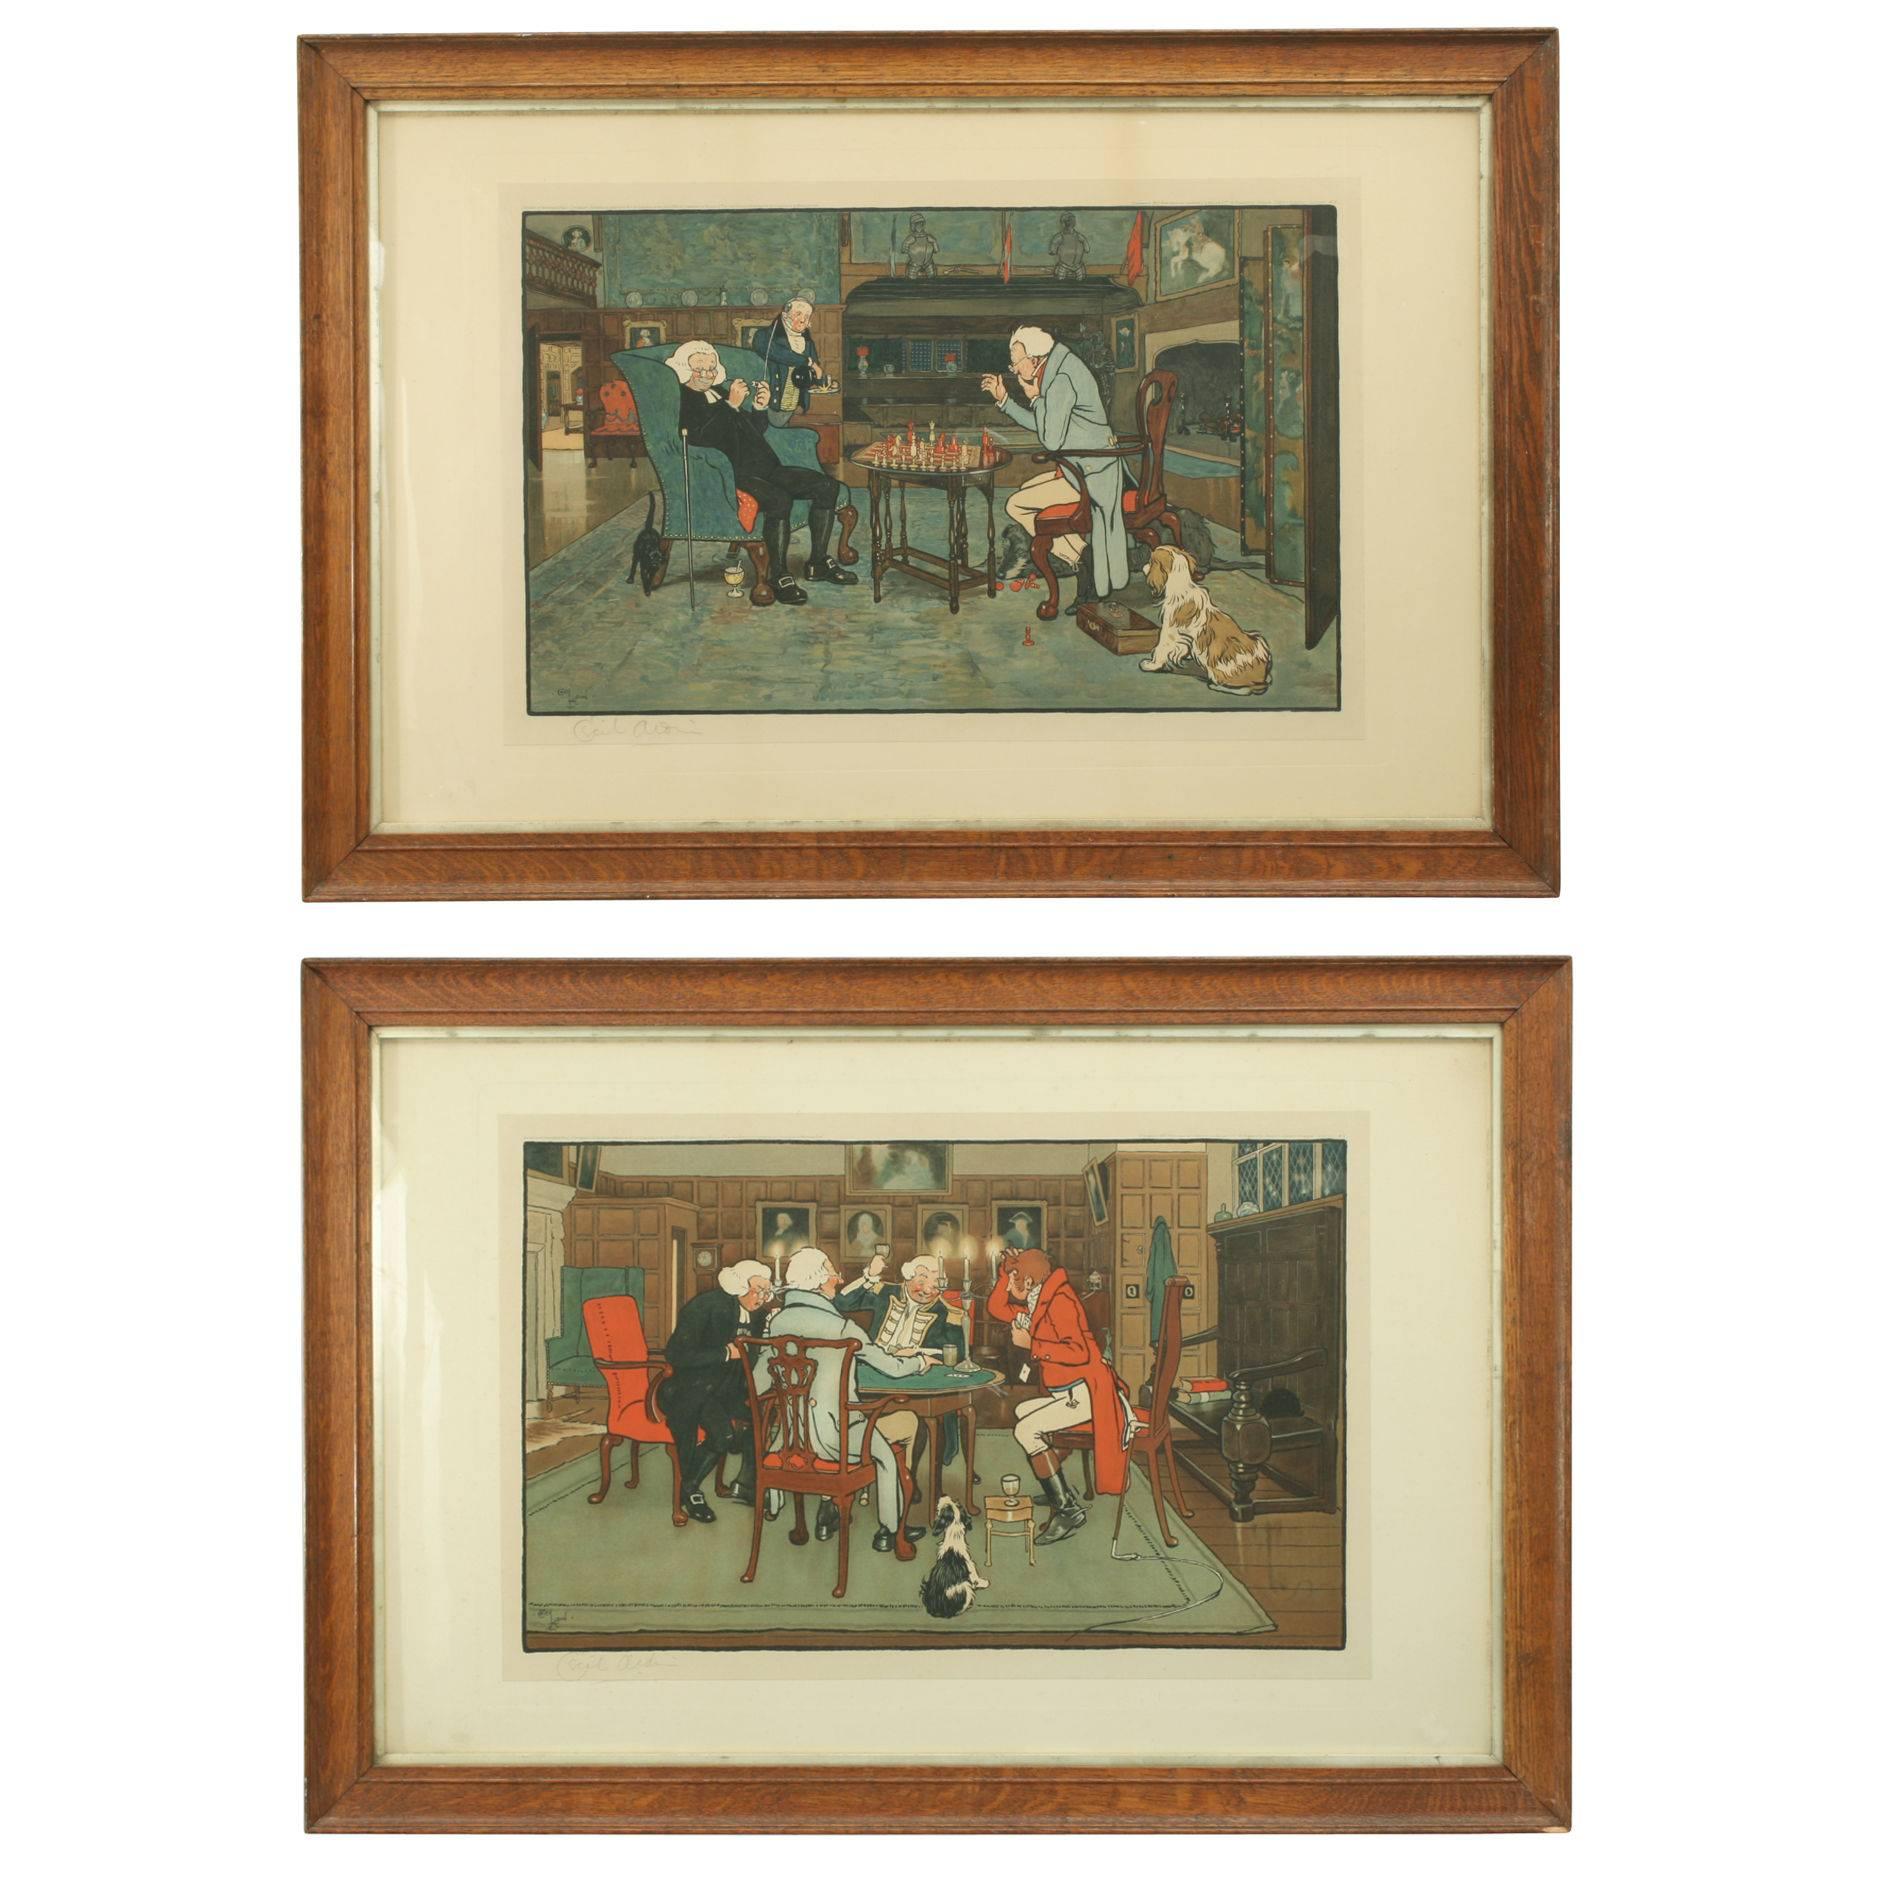 'Mated' and 'Revoked' Pair of Lithographs